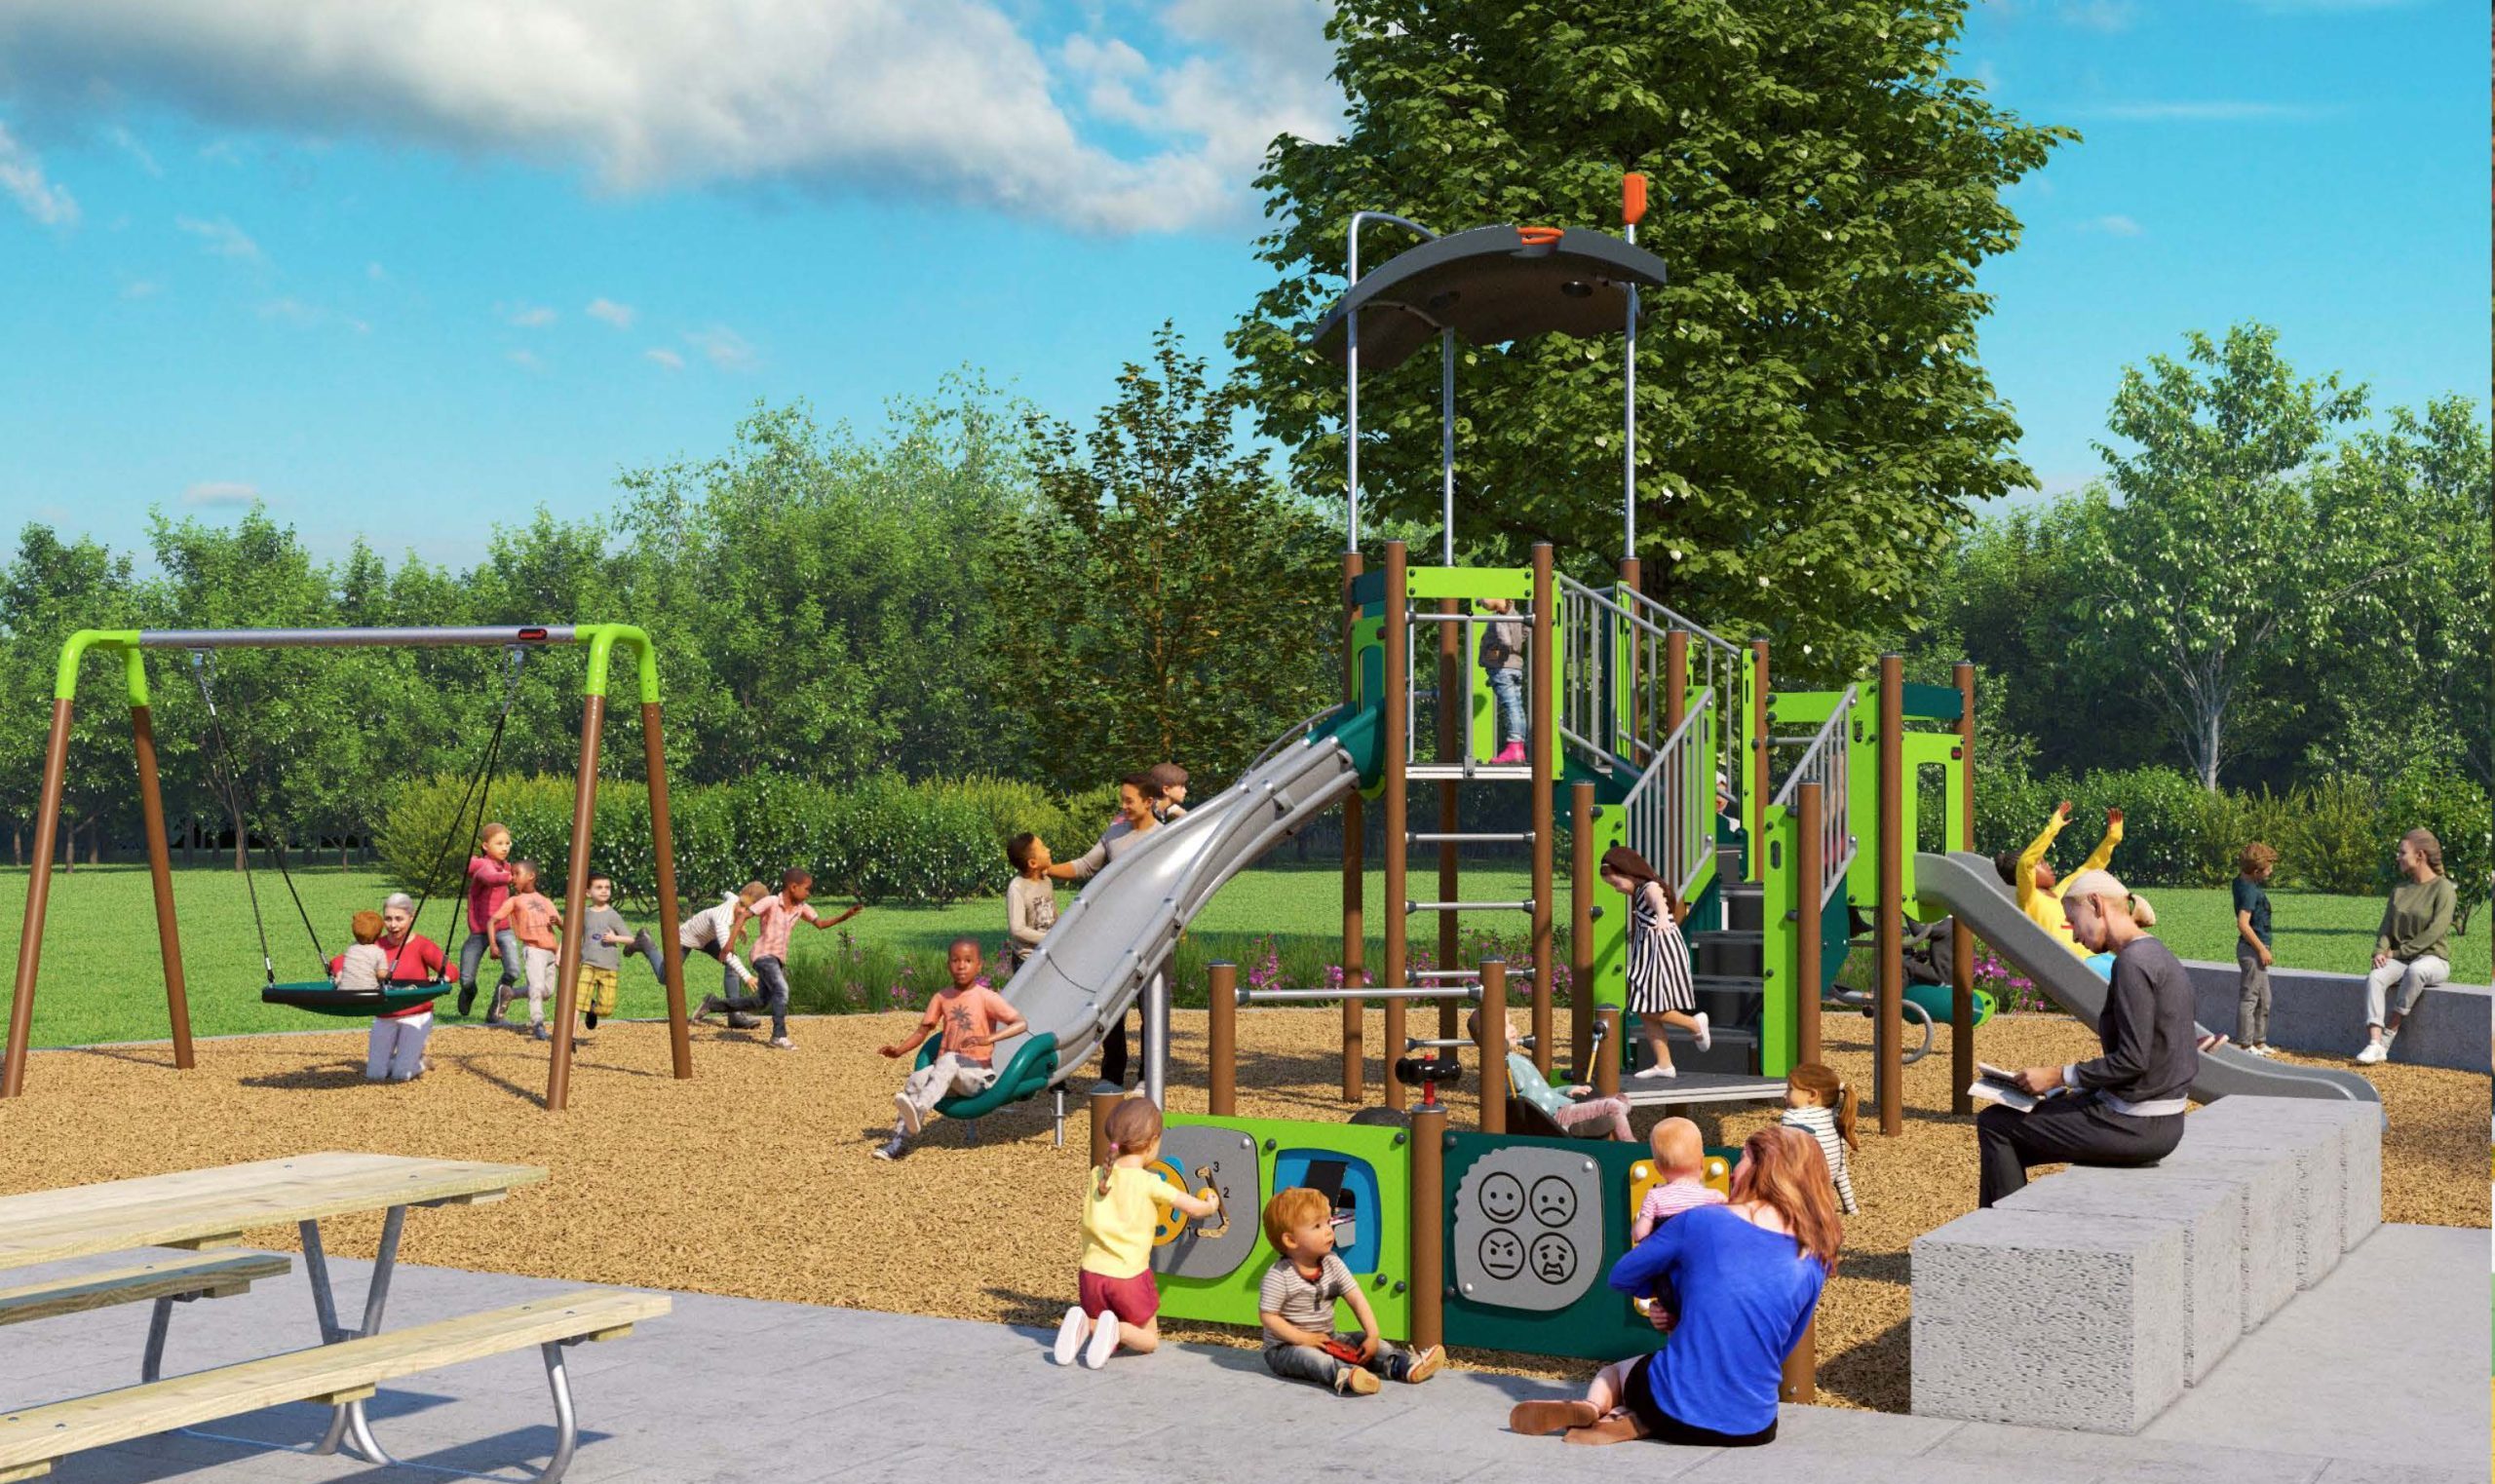 Artistic rendering of playground from side view.